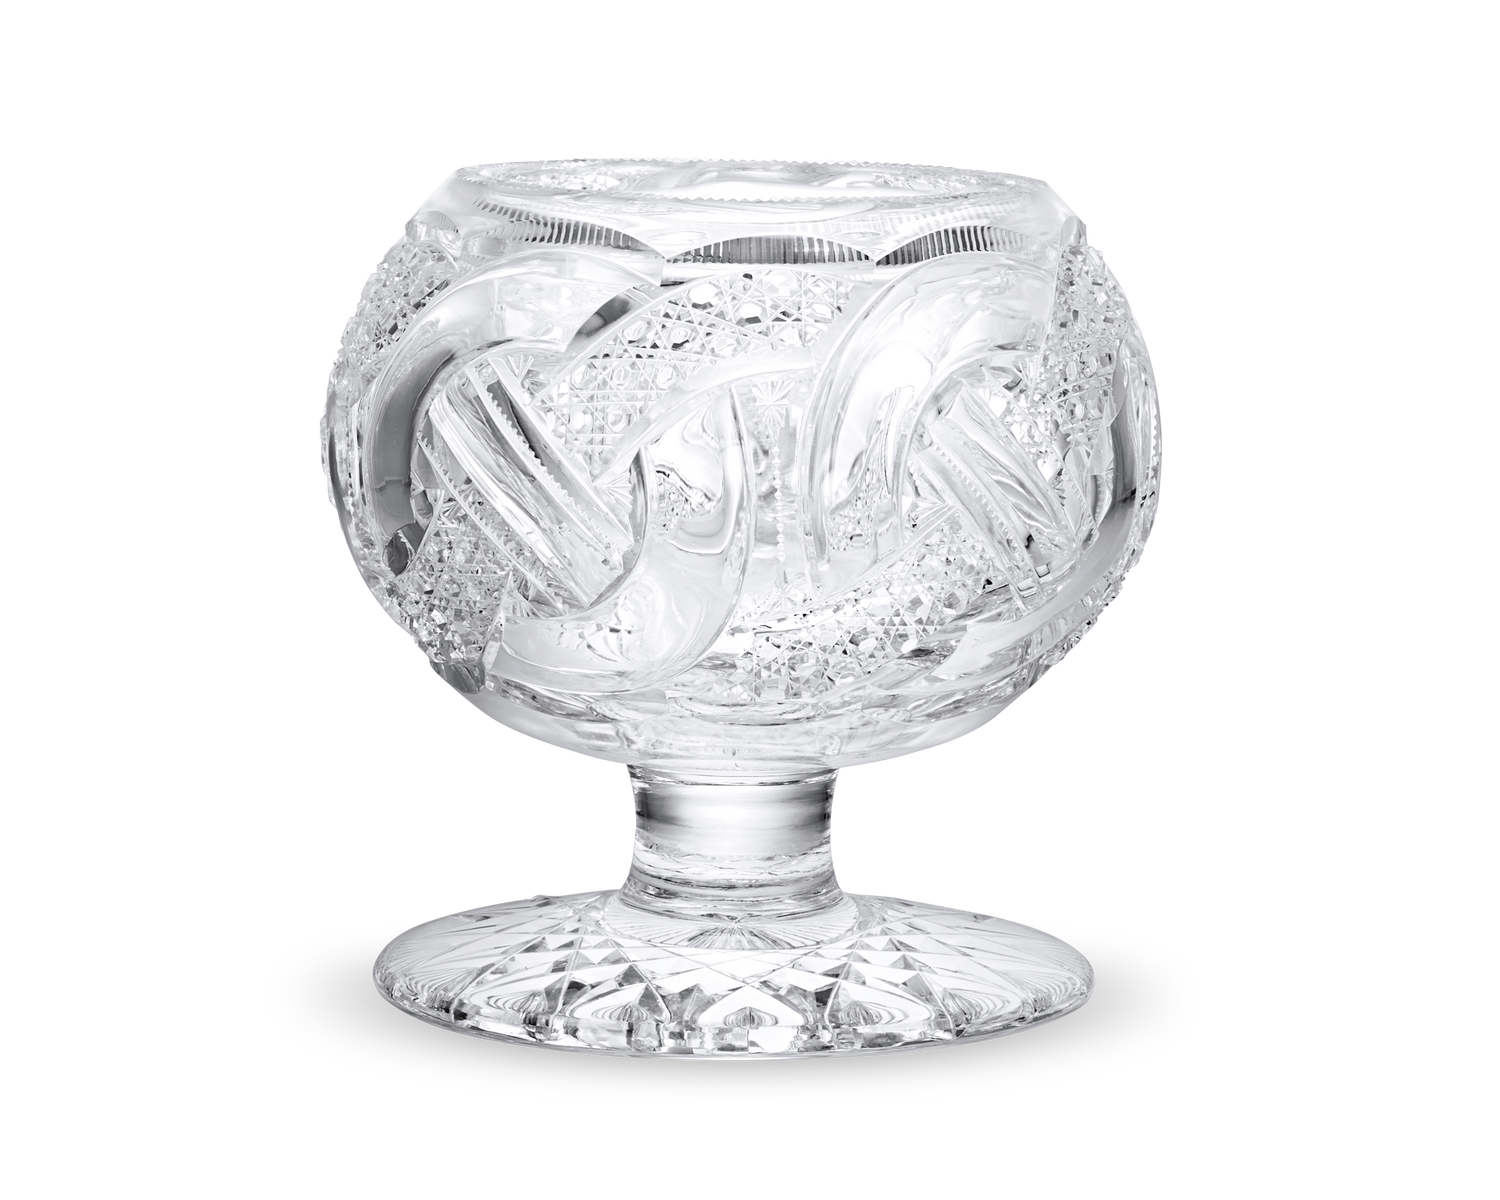 Wedding Ring Pattern Cut Glass Rose Bowl by J. Hoare & Co.